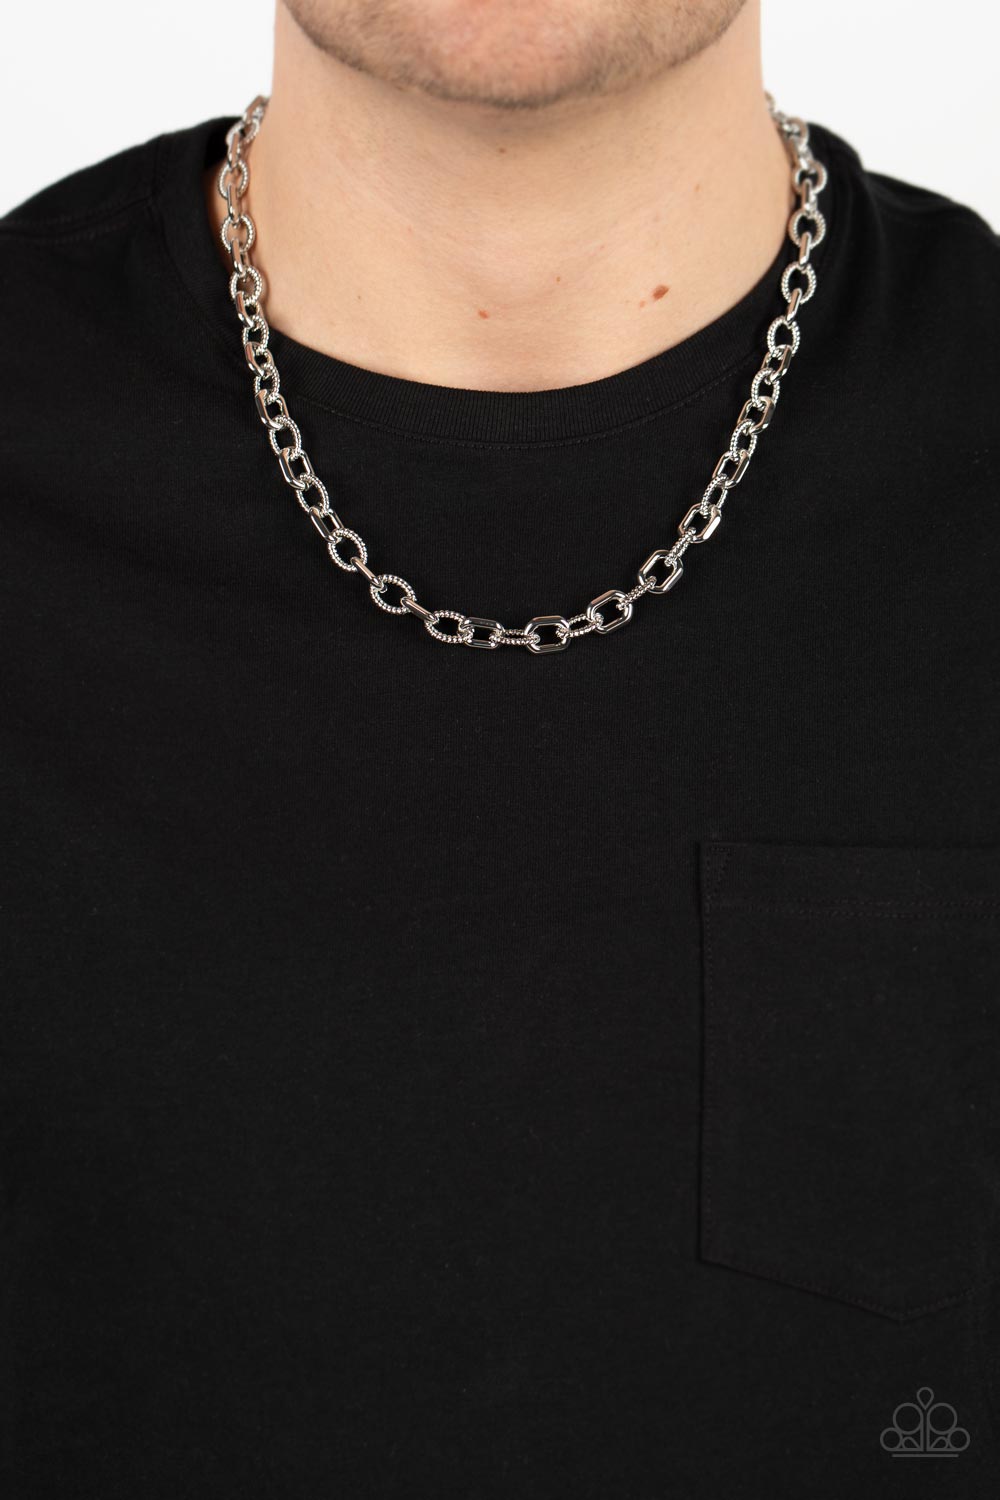 PERFECT MATCH / SET: Modern Motorhead - Silver Chain Urban Necklace AND Double Clutch - Silver Chain Urban Clasp Bracelet